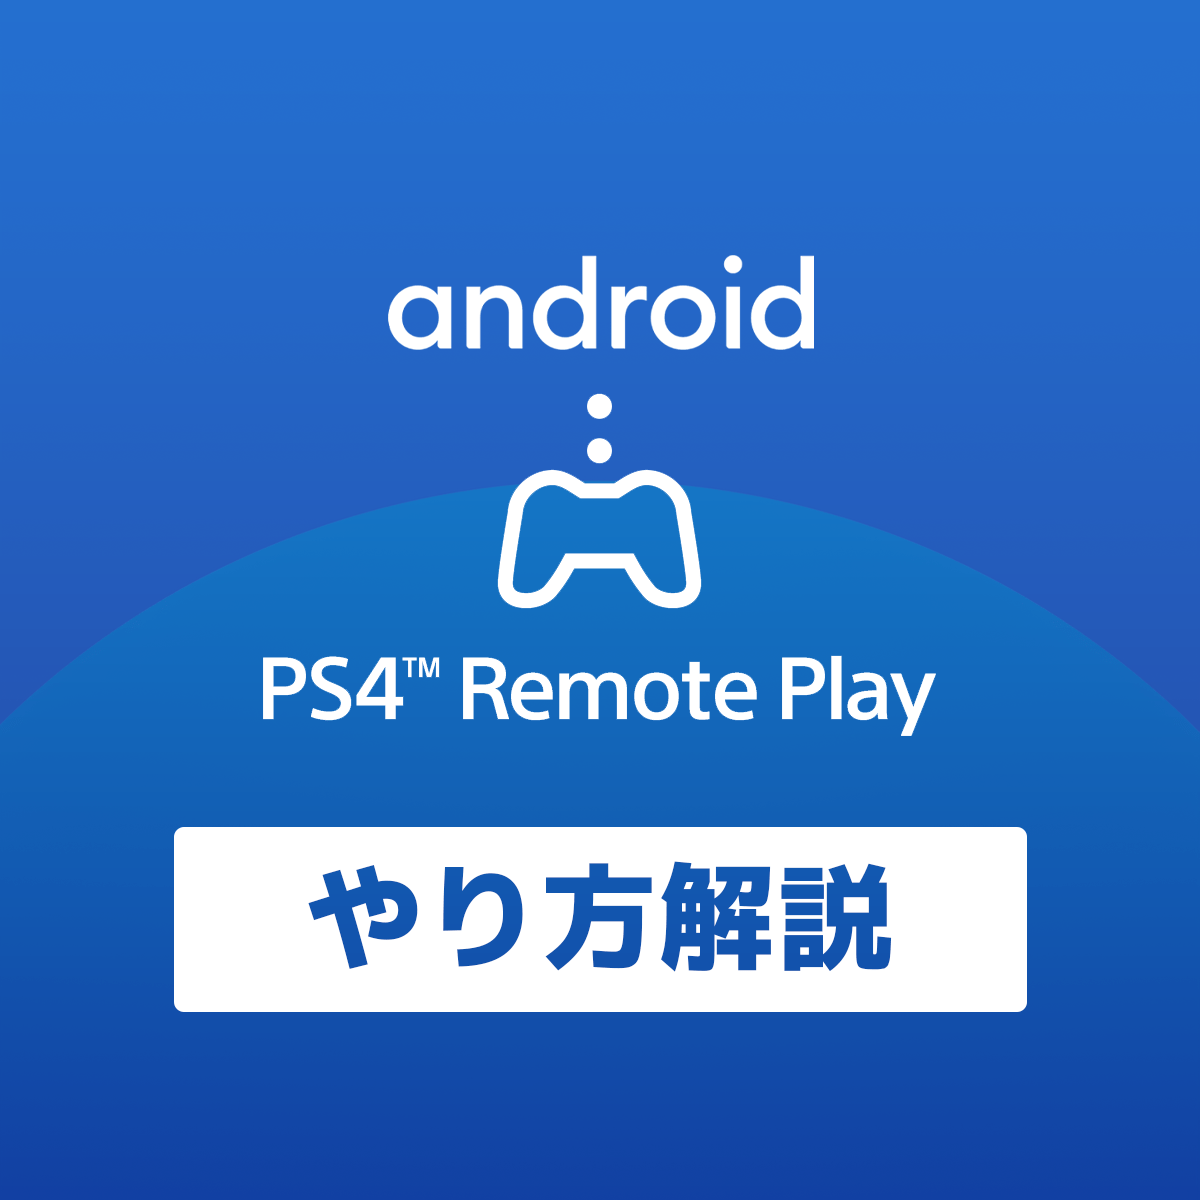 PS4 Androidでリモートプレイのやり方（画像付）